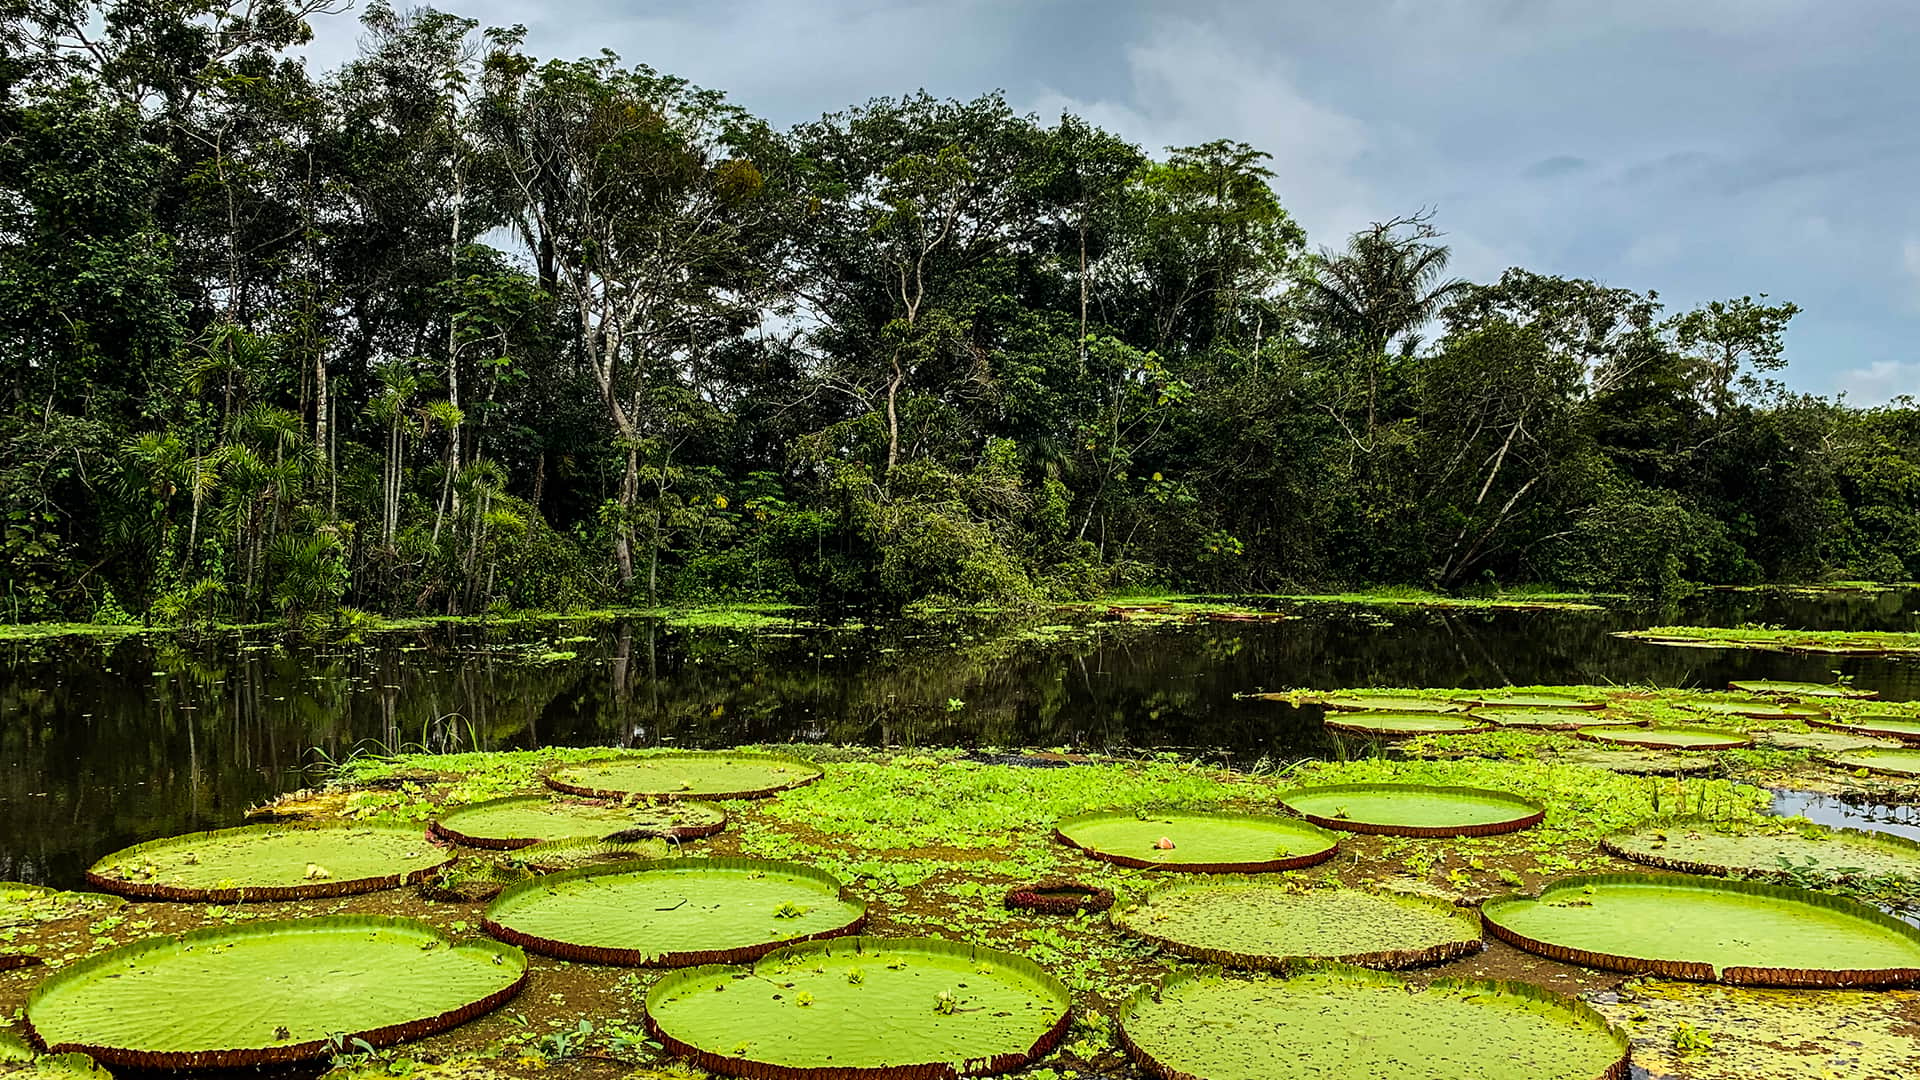 11Victoria amazonica plants are aquatic vegetation that cover the water surface in spectacular displays | Responsible Travel Peru